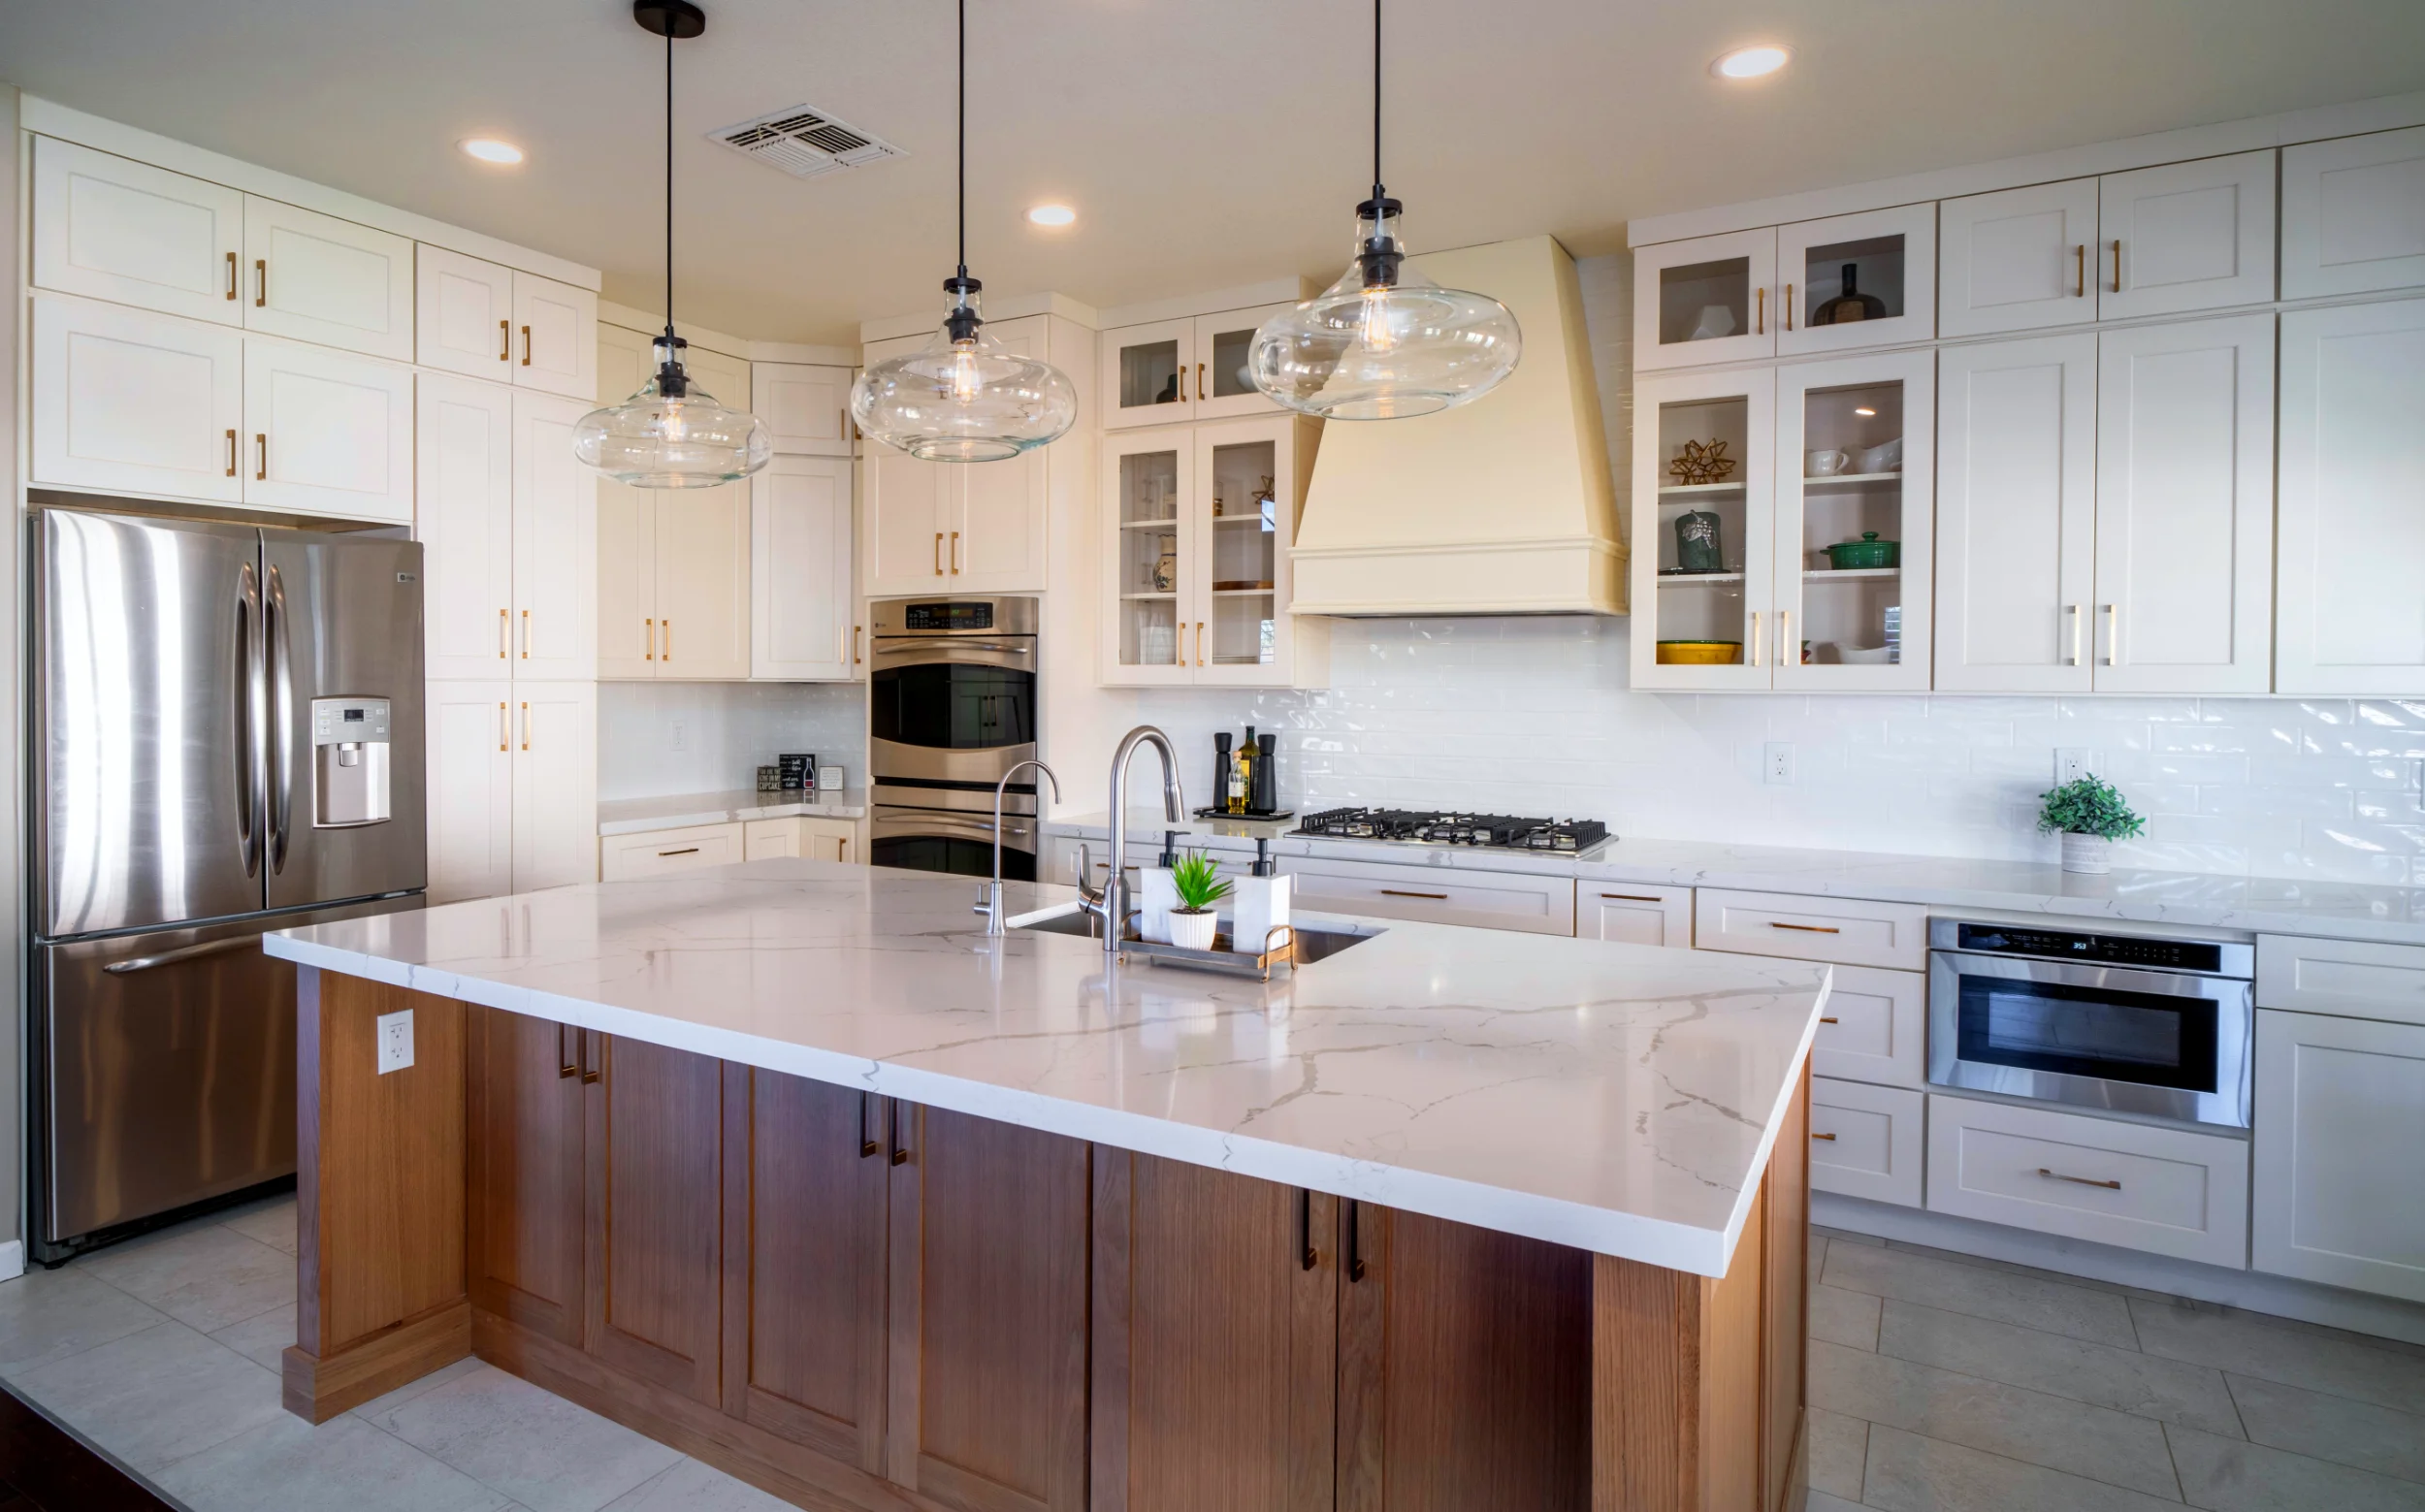 Kitchen remodeling with premium materials